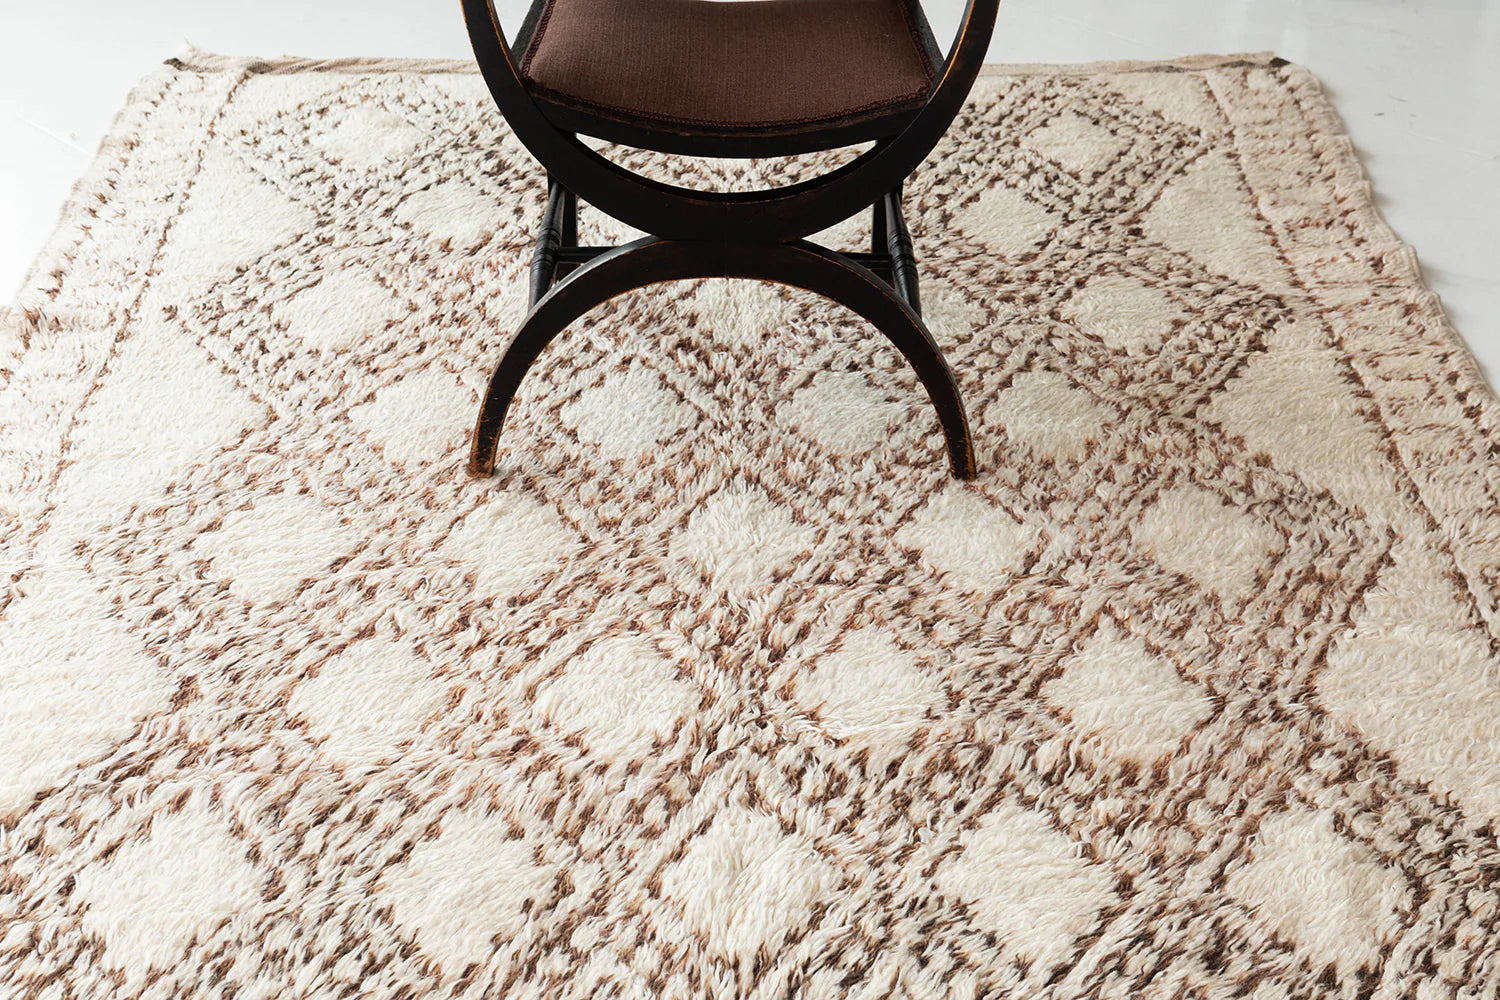 Beni Rugs, Official Site